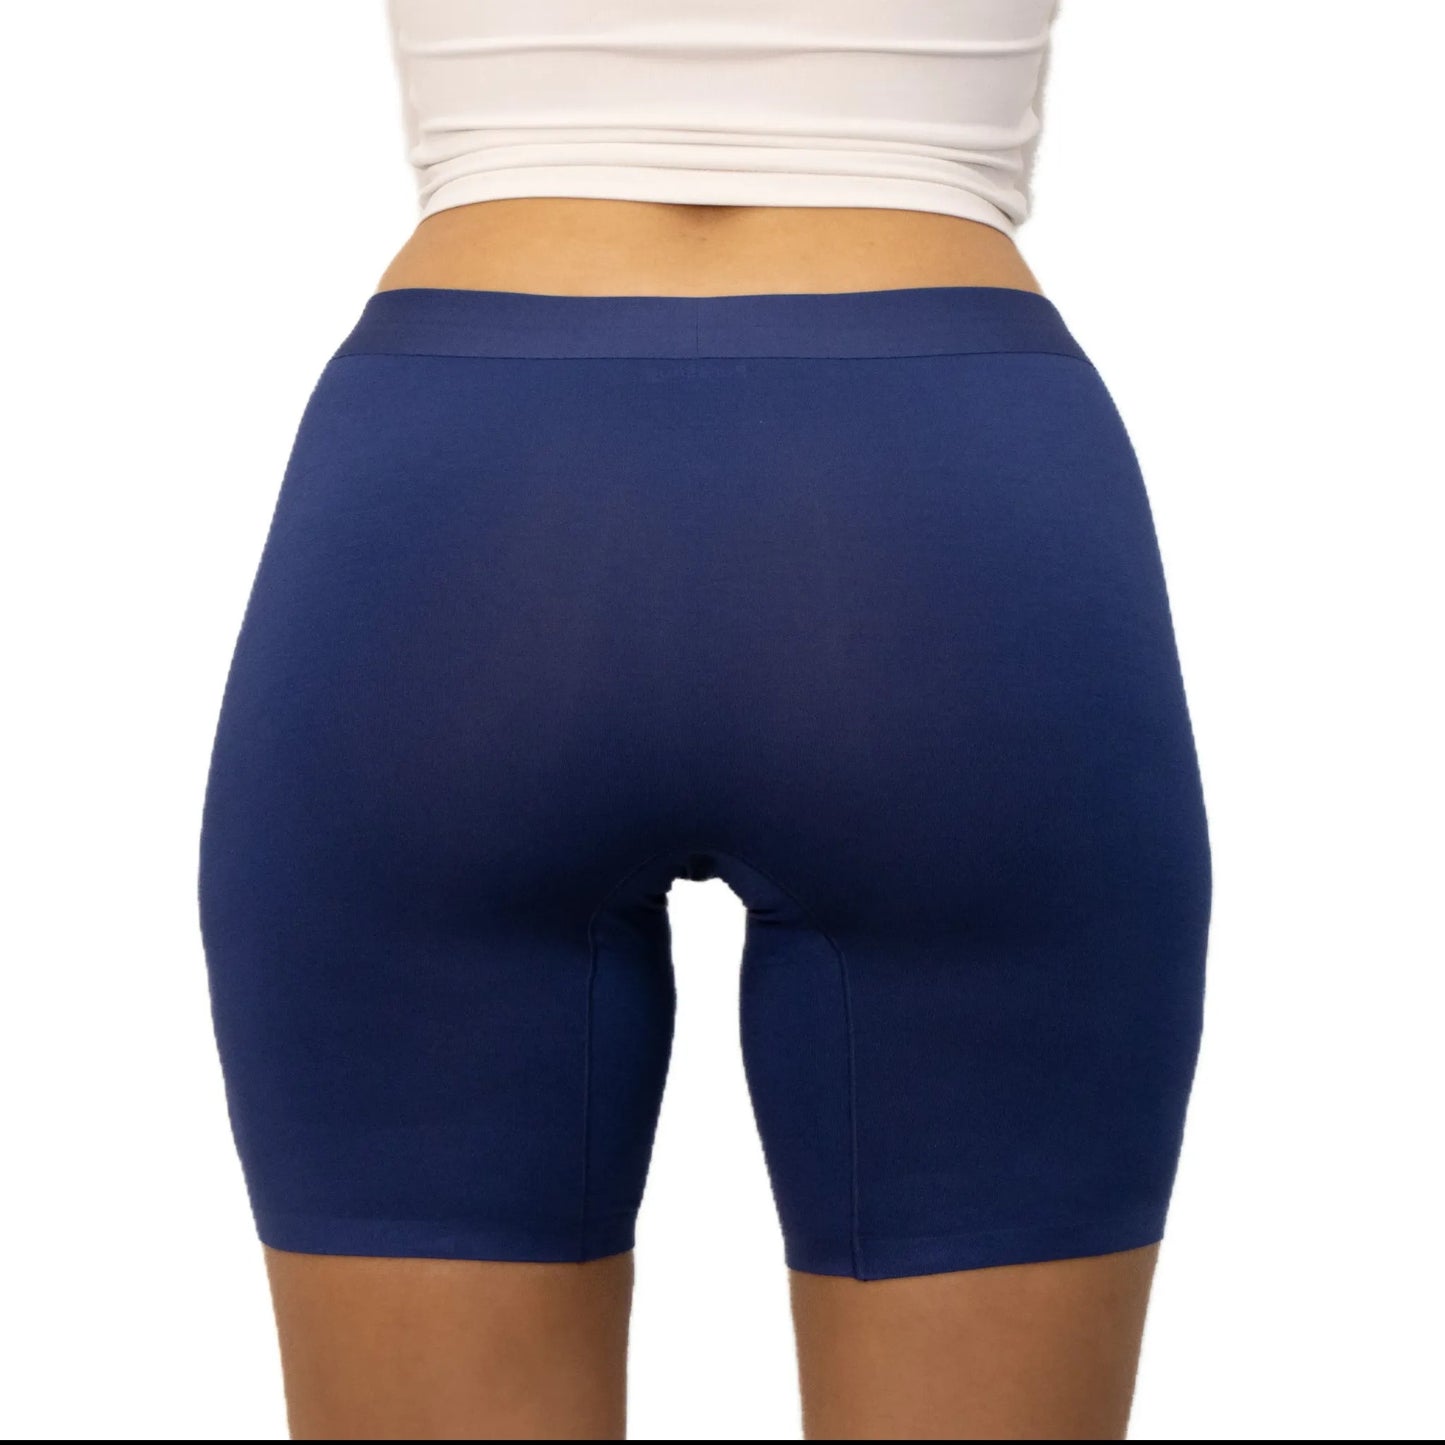 puresnug ladies' boxer briefs back view in navy colour